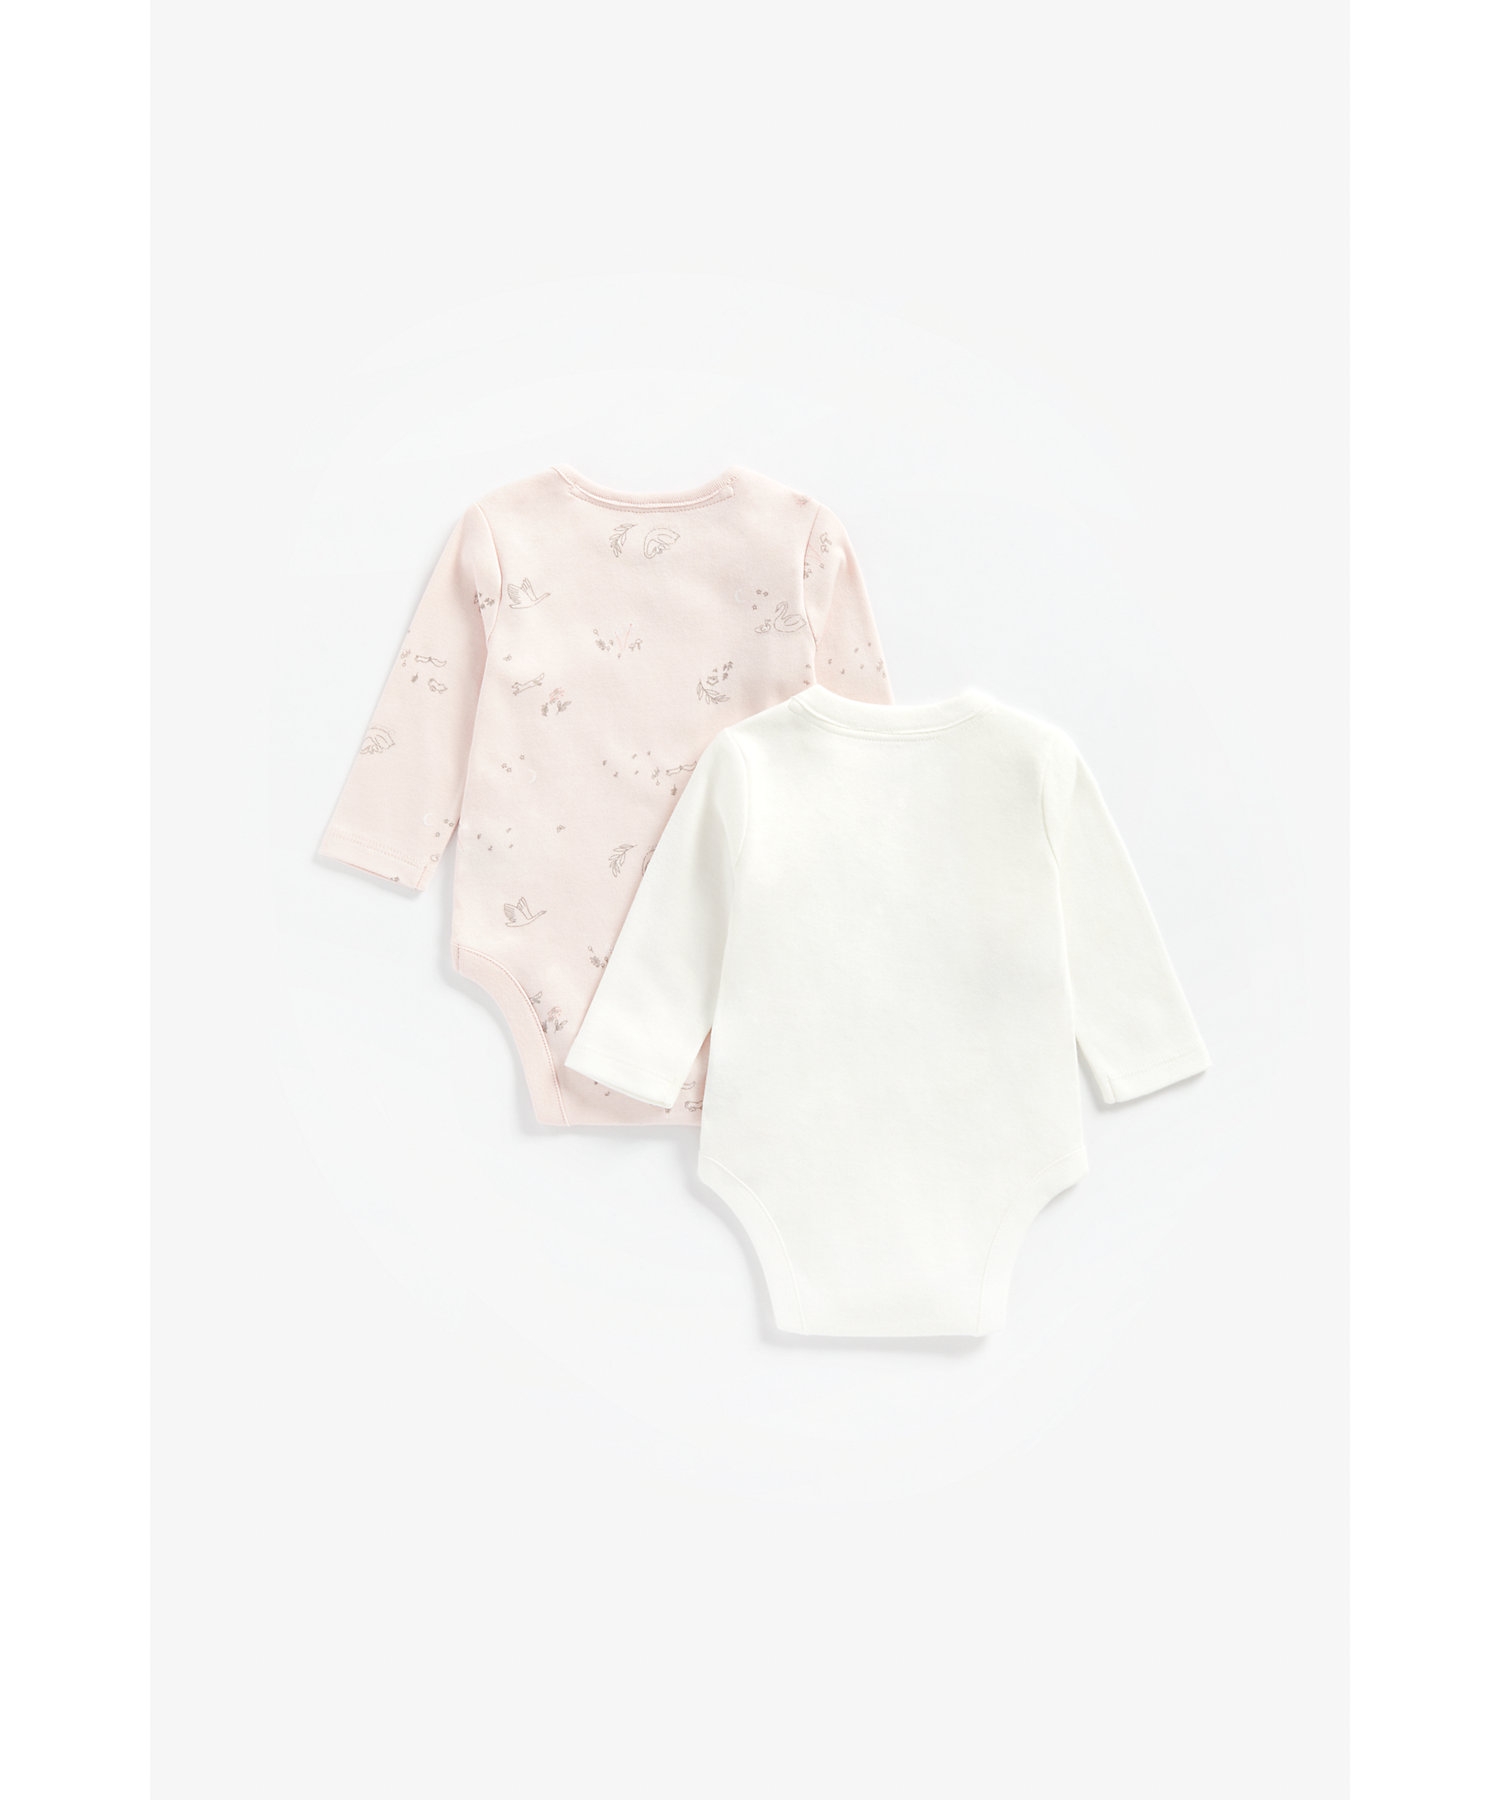 Mothercare | Girls Full Sleeves Bodysuit Swan Patchwork And Embroidery - Pack Of 2 - Pink 1